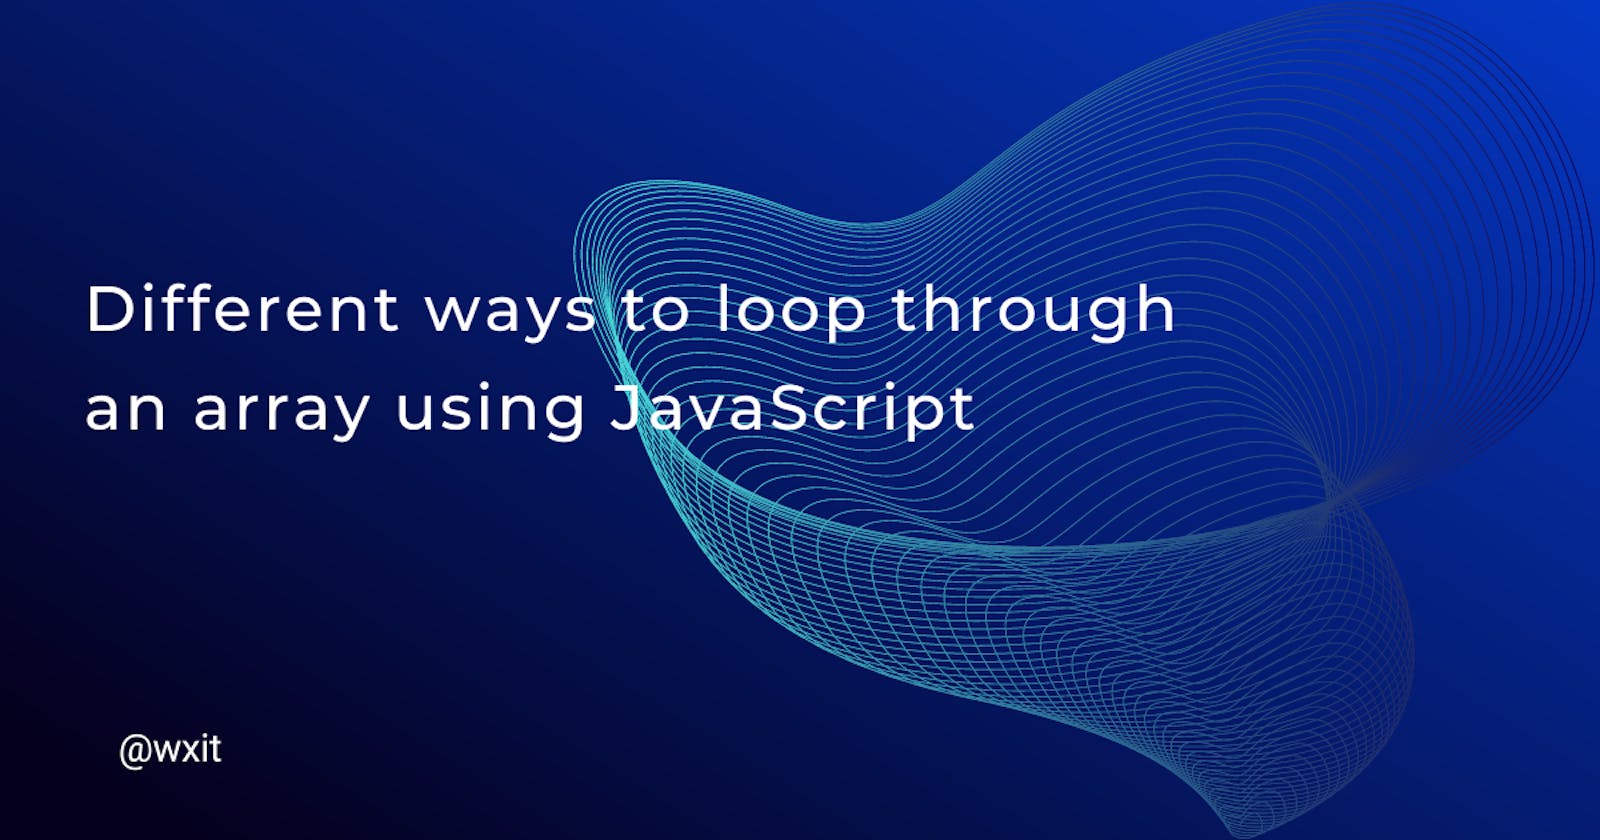 Different ways to loop through an array using JavaScript